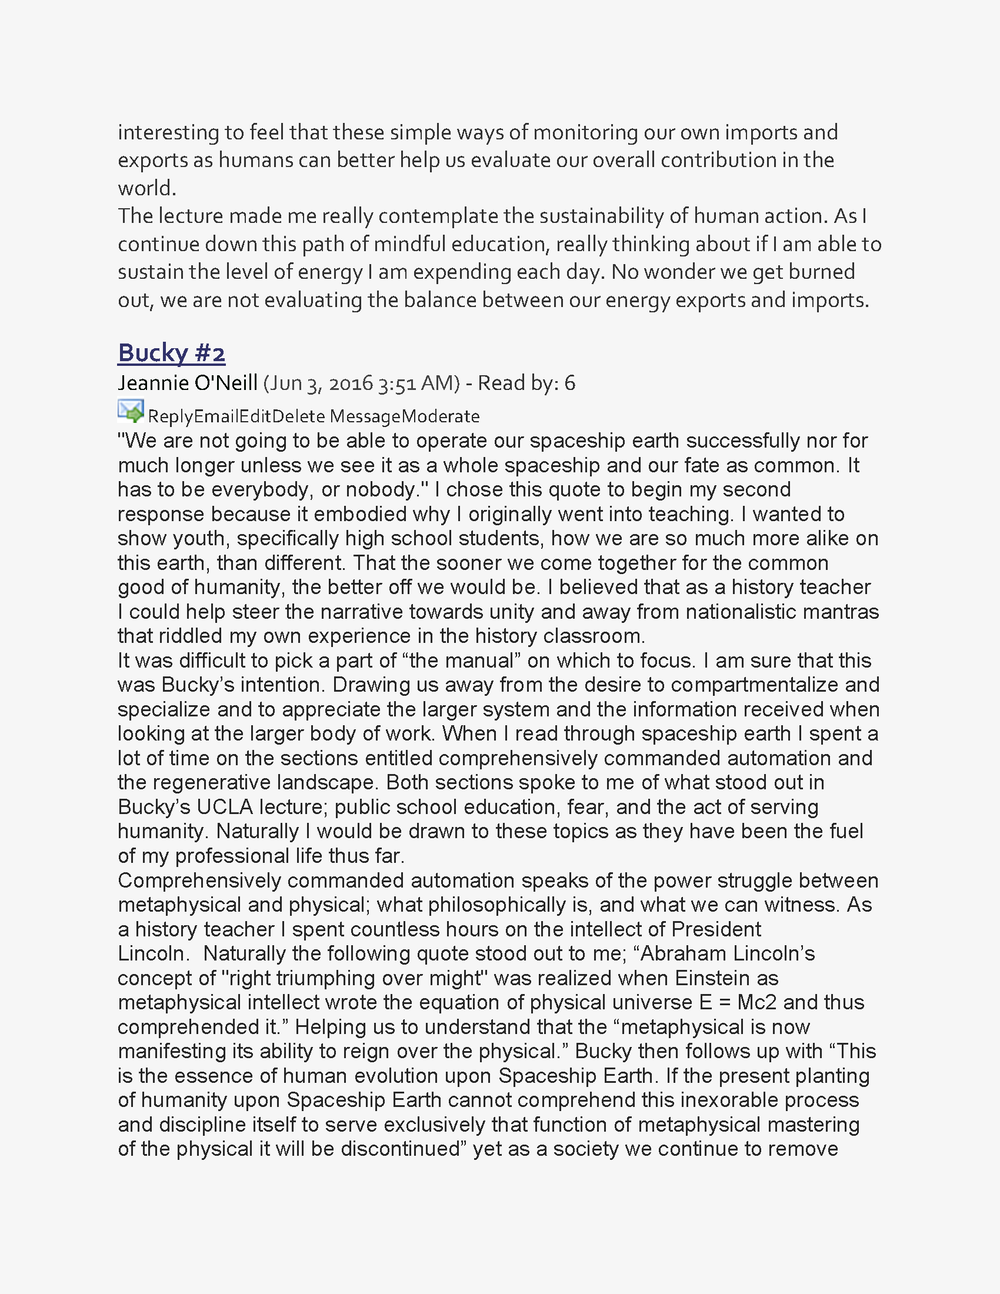 Koh, Ming Wei --Exemplar - A Fuller View - Systemic View of the World_Page_06.png